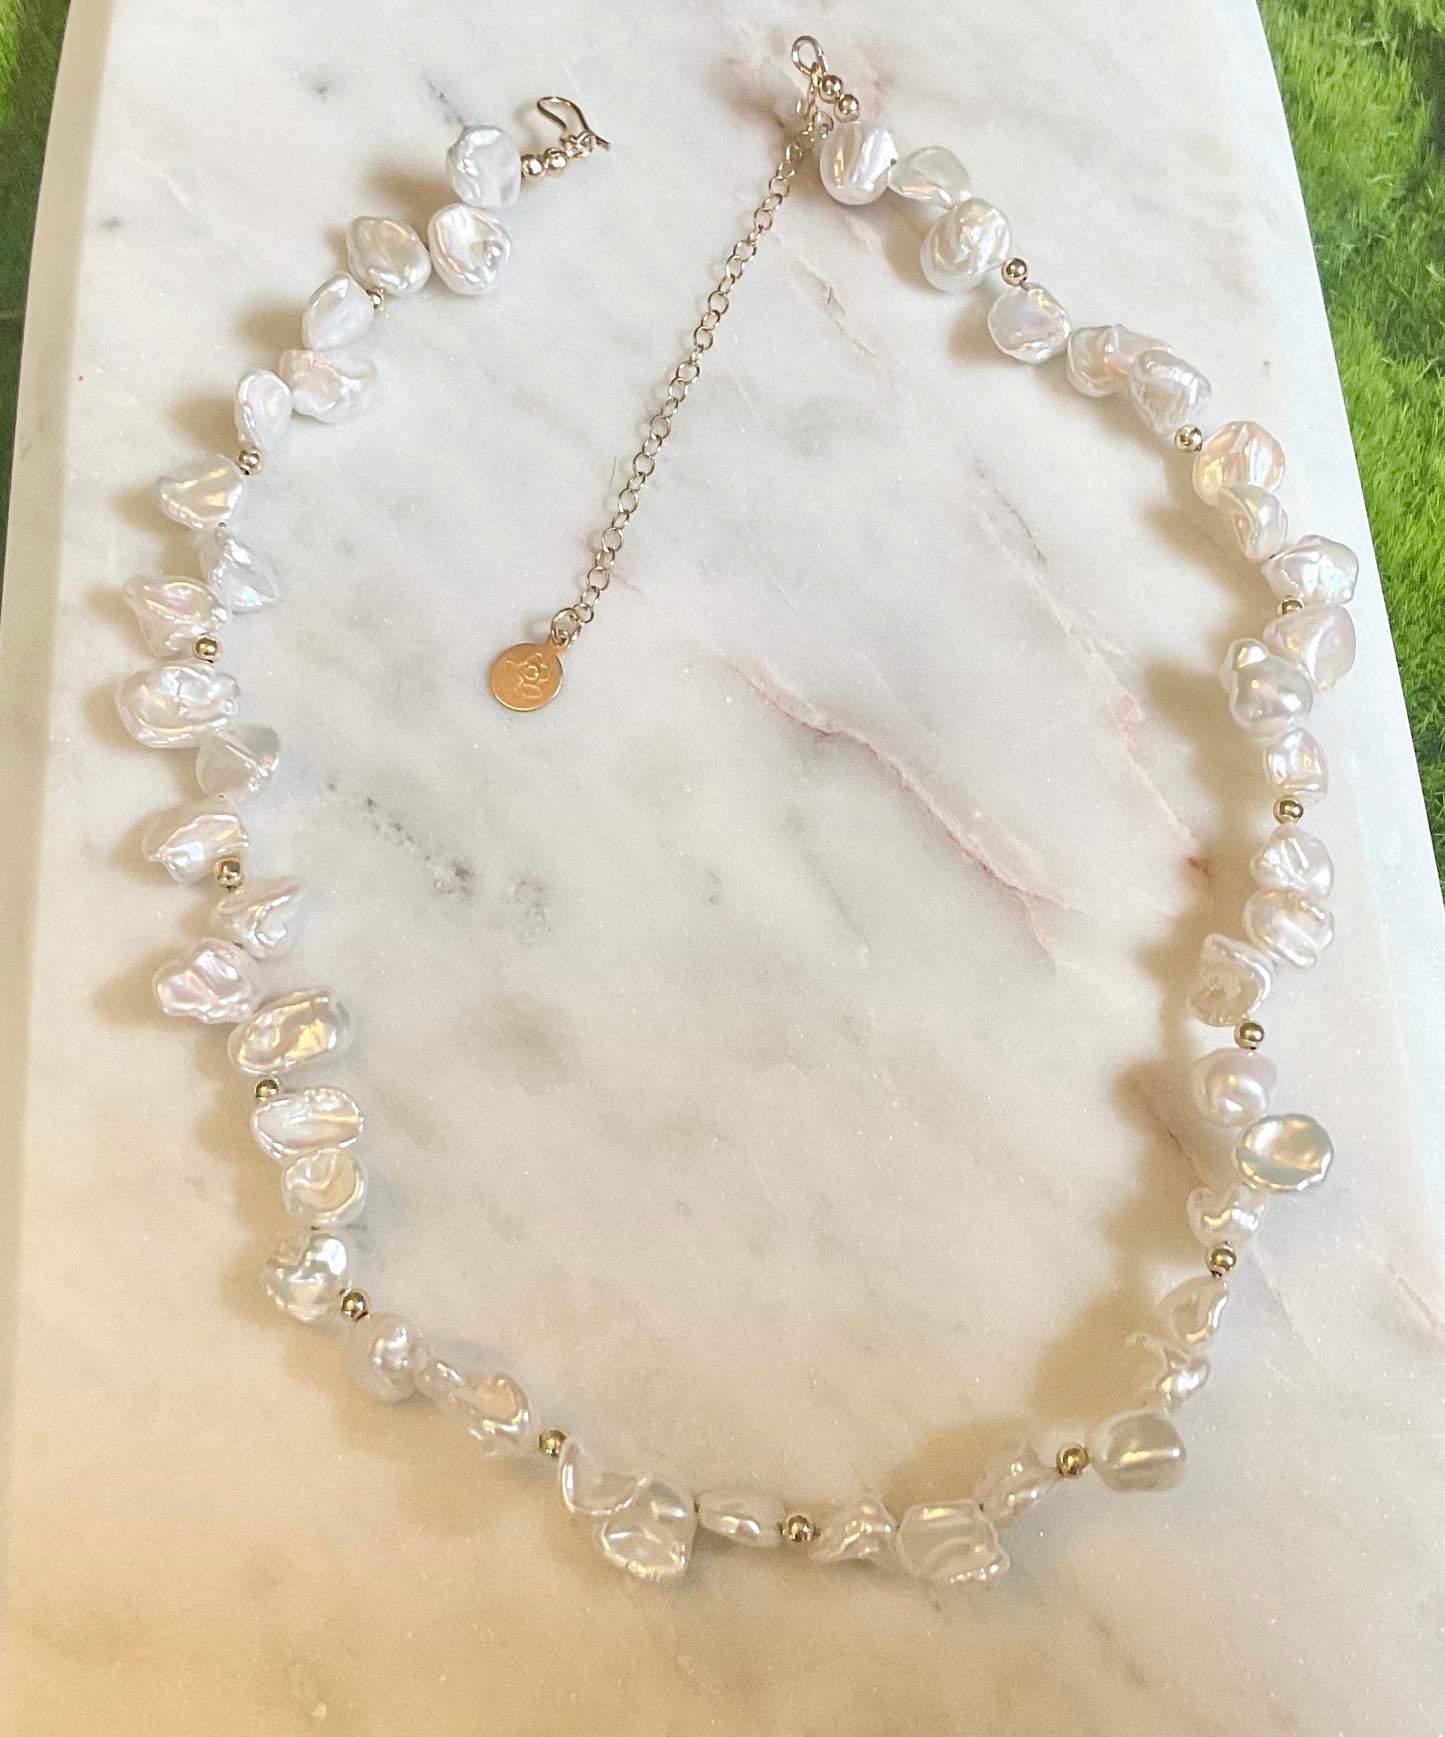 Keshi Pearl Necklace with Gold-filled Beads